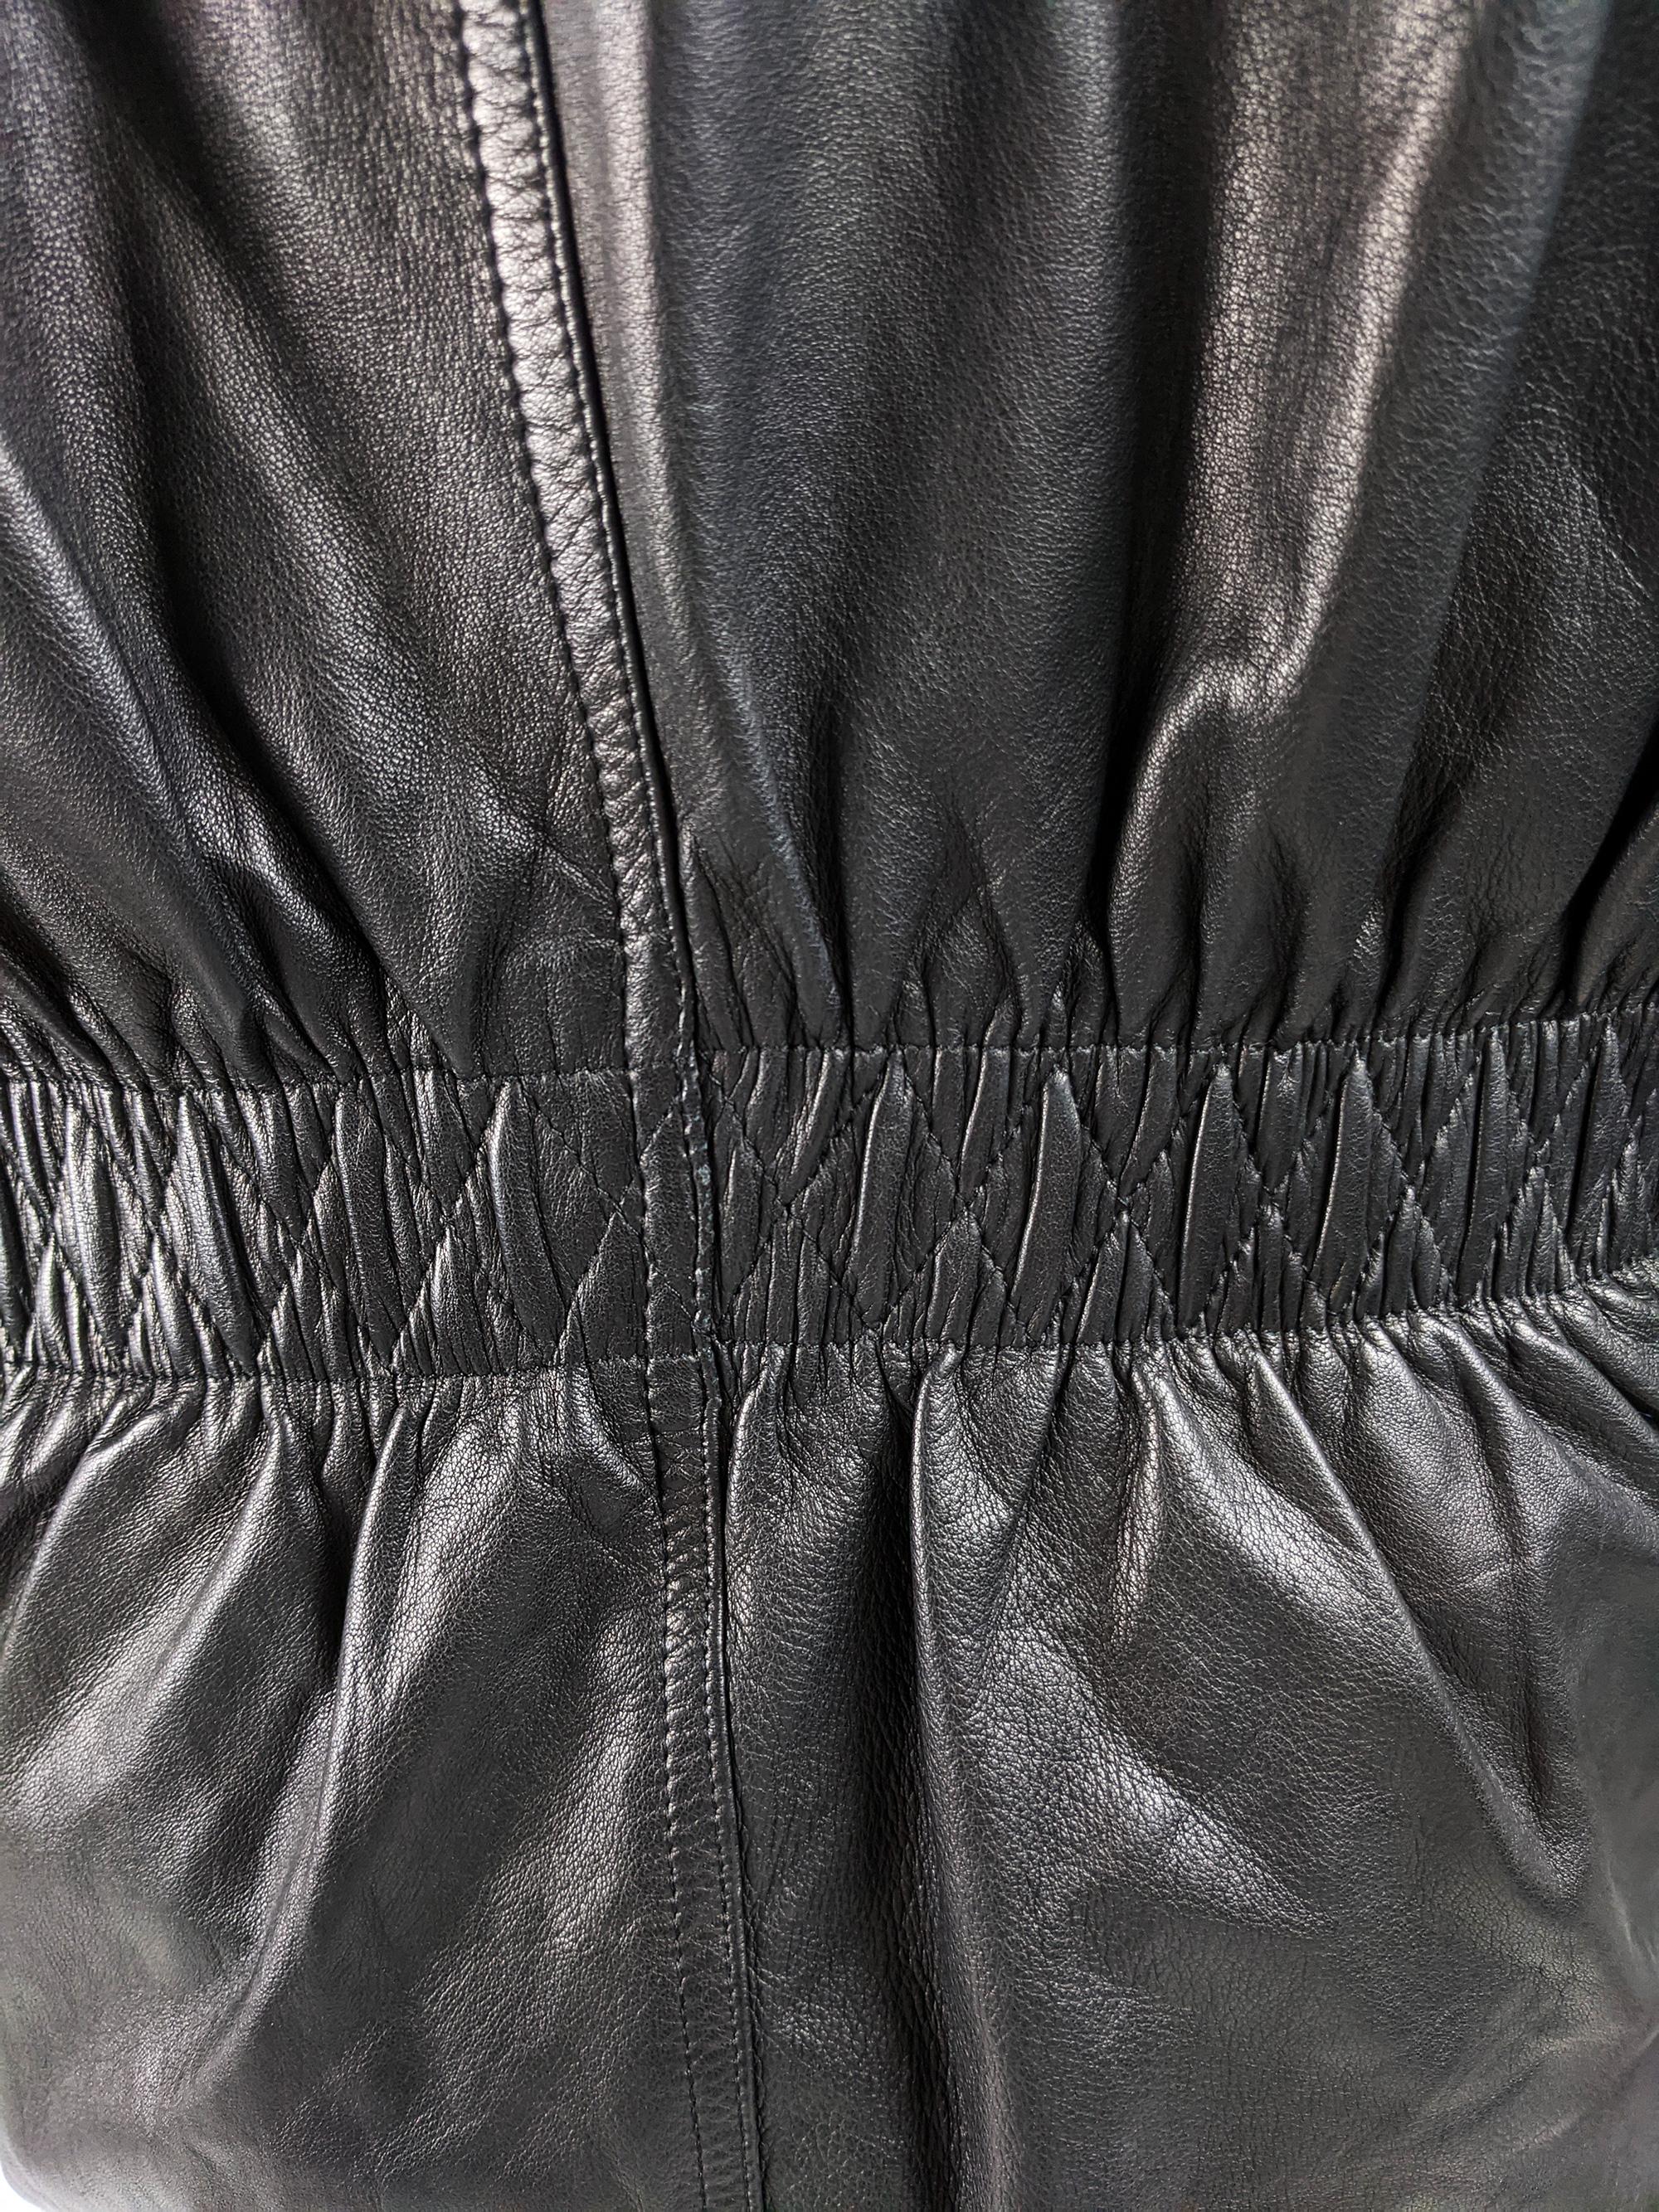 Gianni Versace Rare Mens Leather Jacket, A/W 1986 at 1stDibs